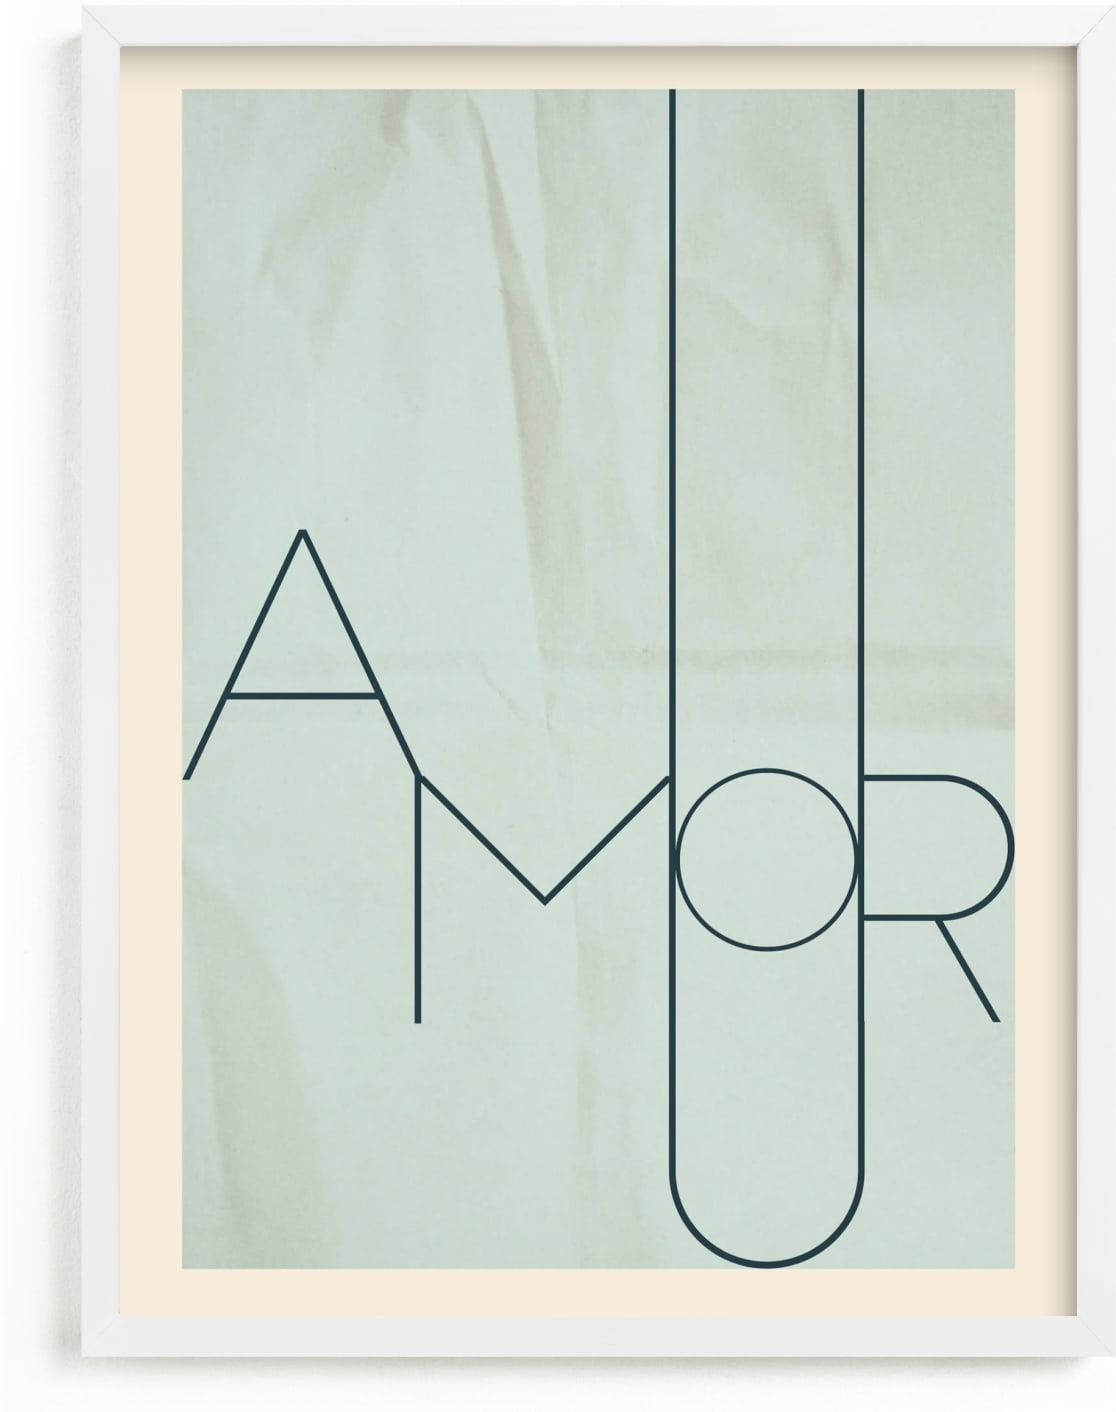 This is a blue art by Morgan Kendall called Amour.